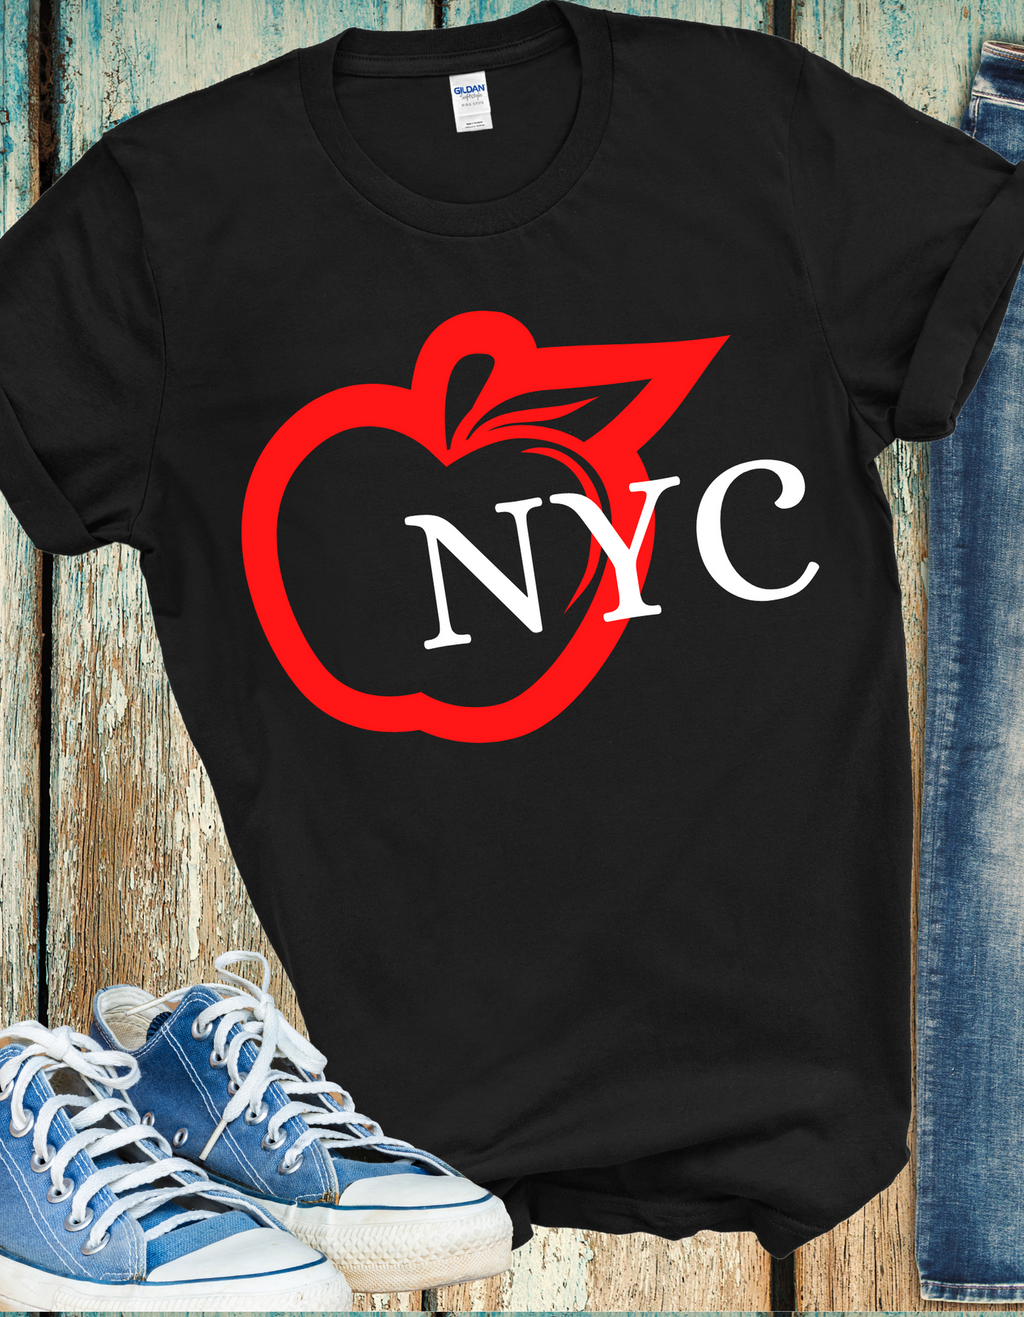 NYC in the HOUSE tees.